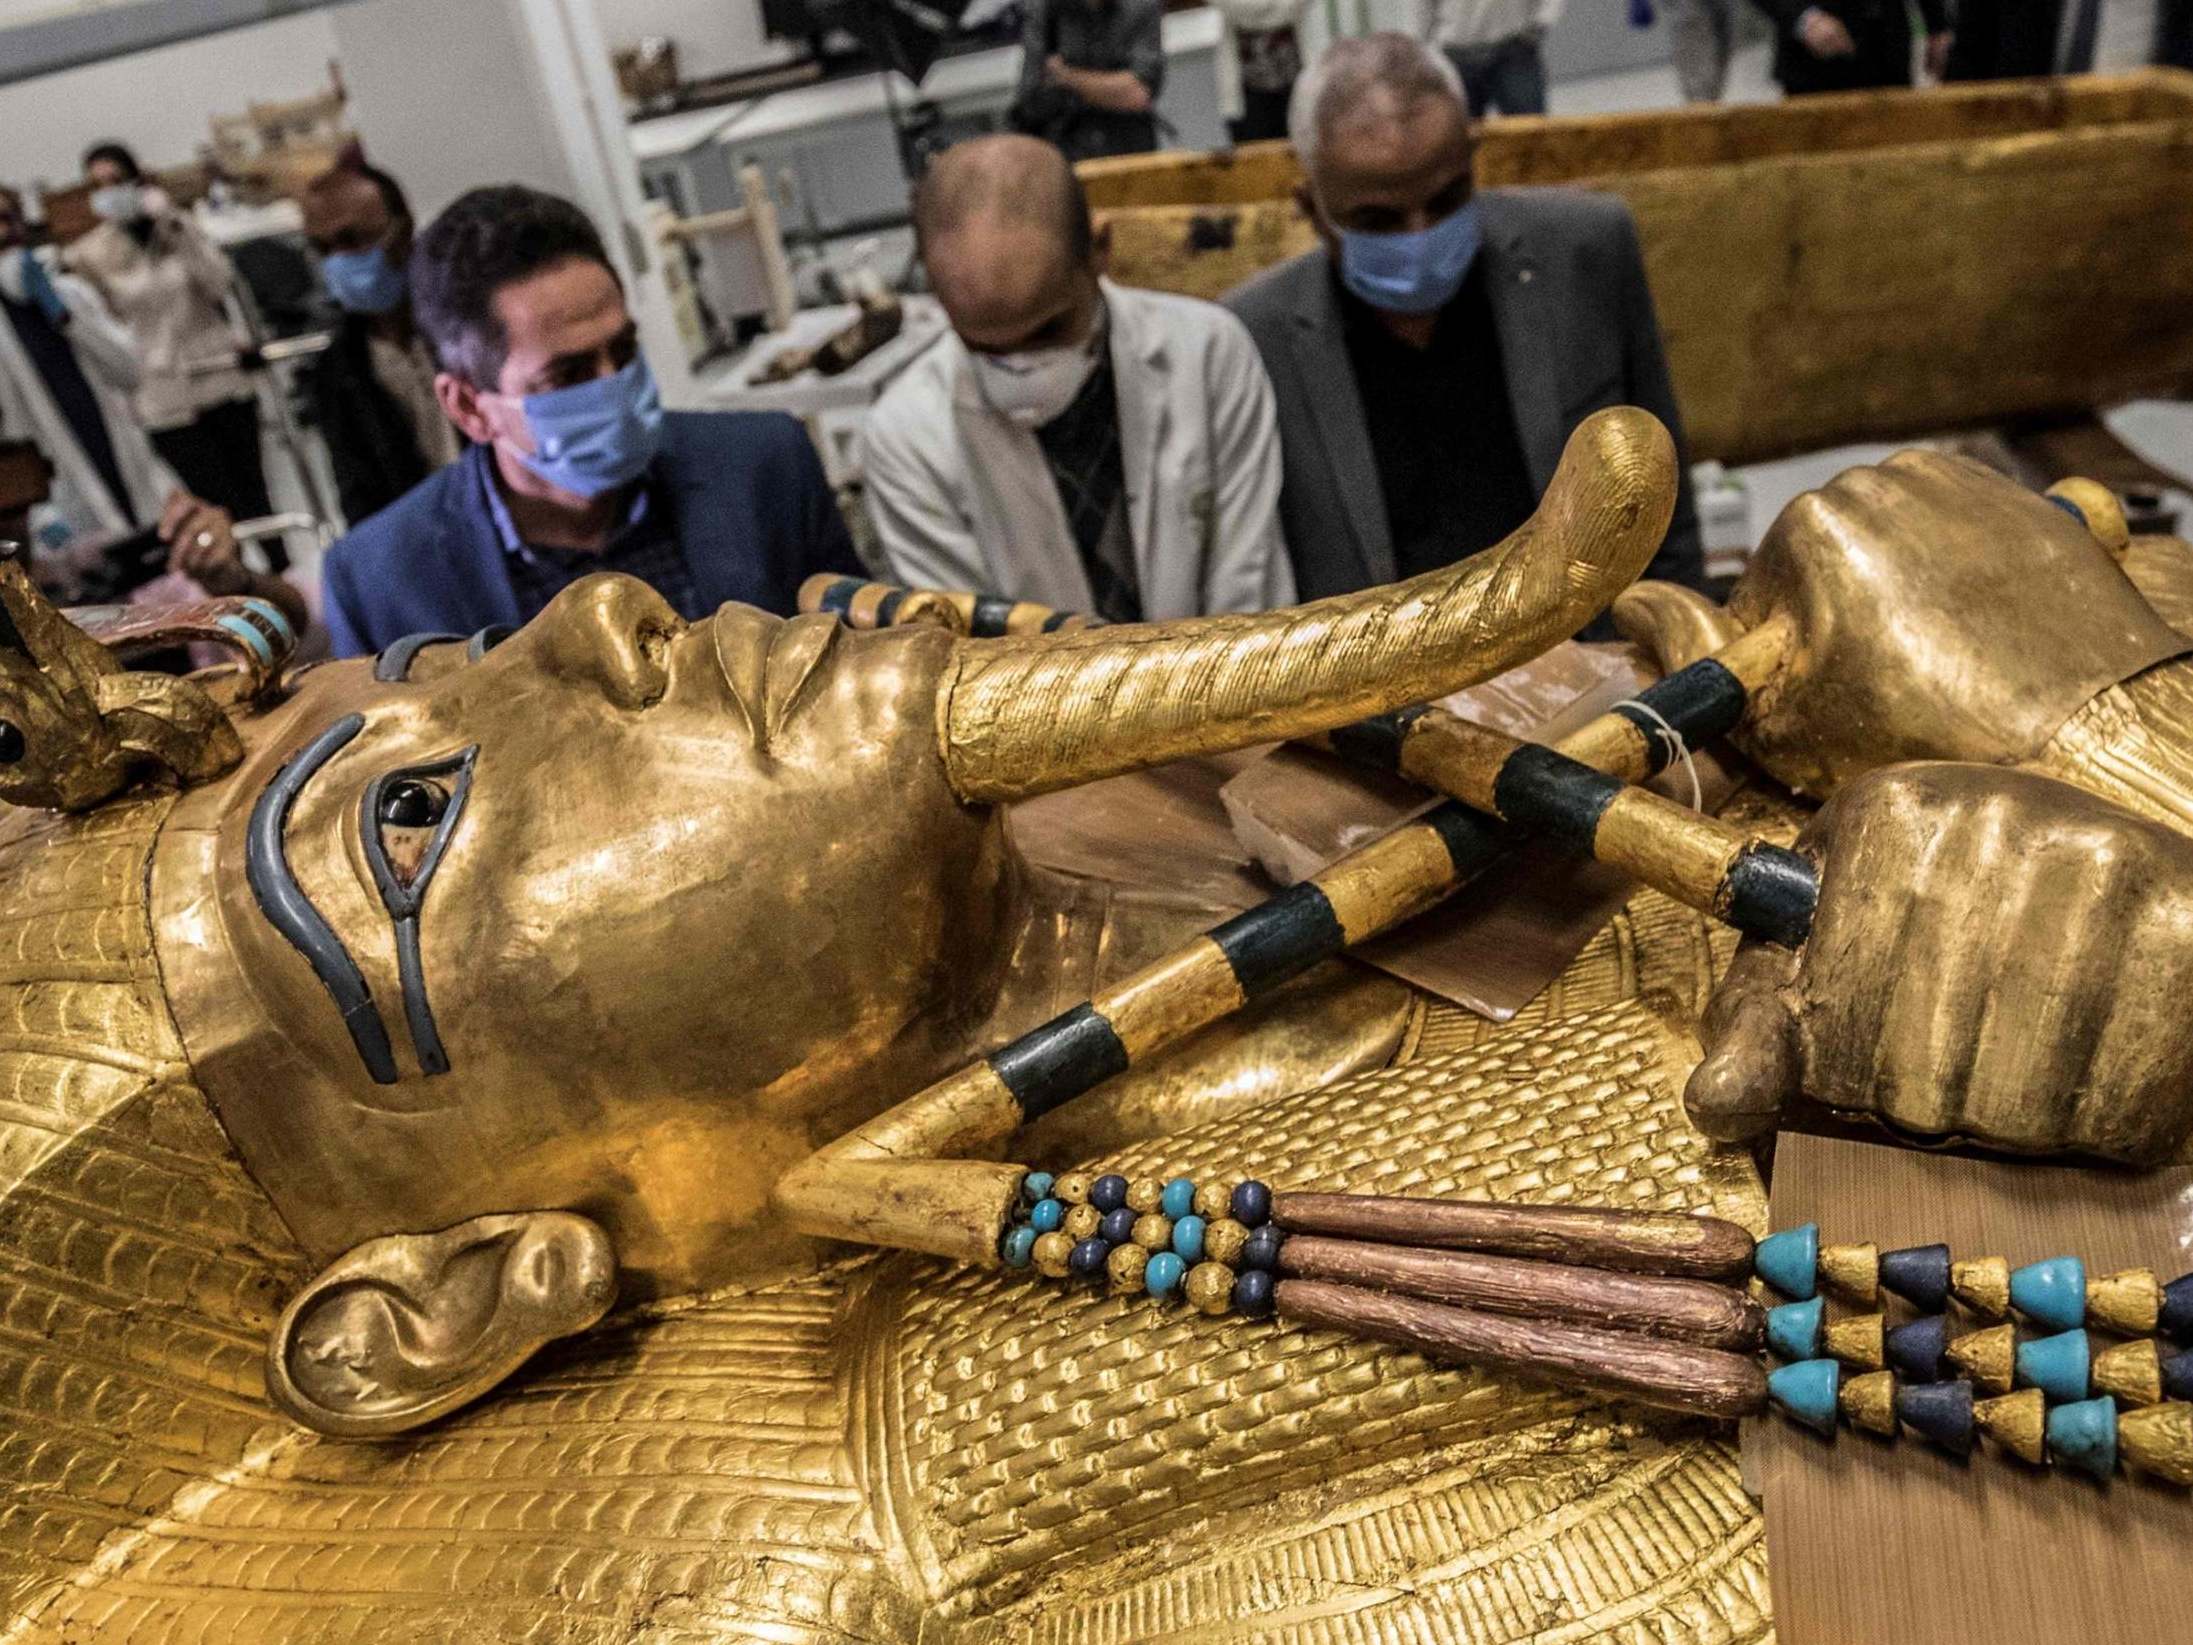 Antiquity access: Sphinx International Airport is convenient for the new Grand Egyptian Museum